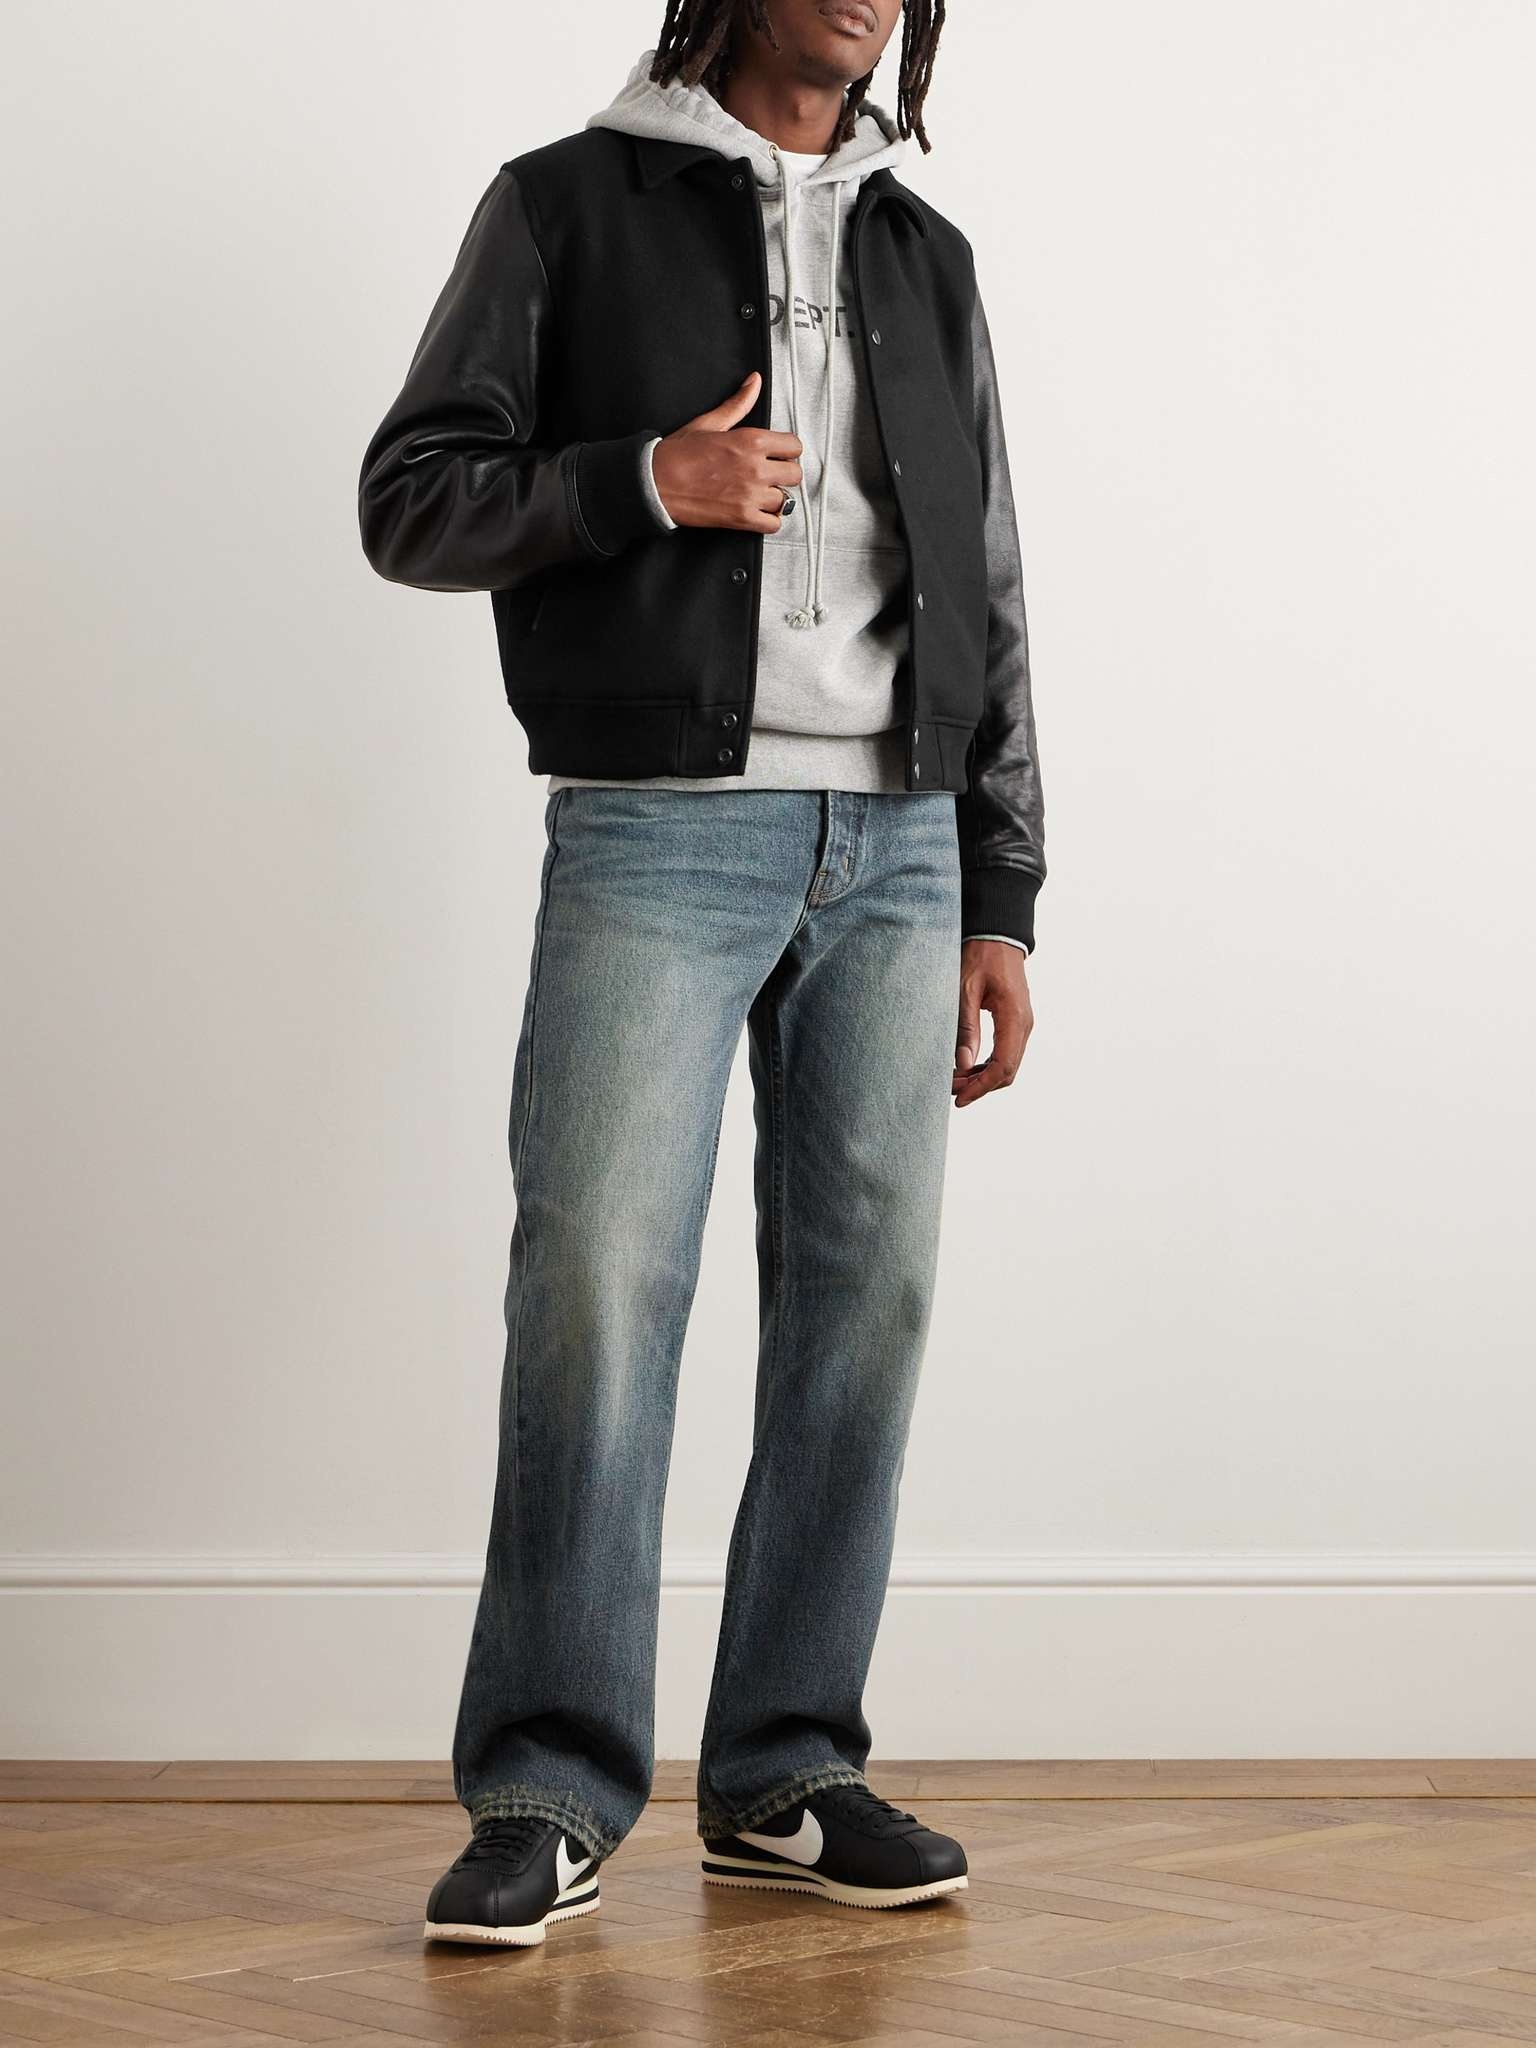 Wool-Blend and Leather Varsity Jacket - 2